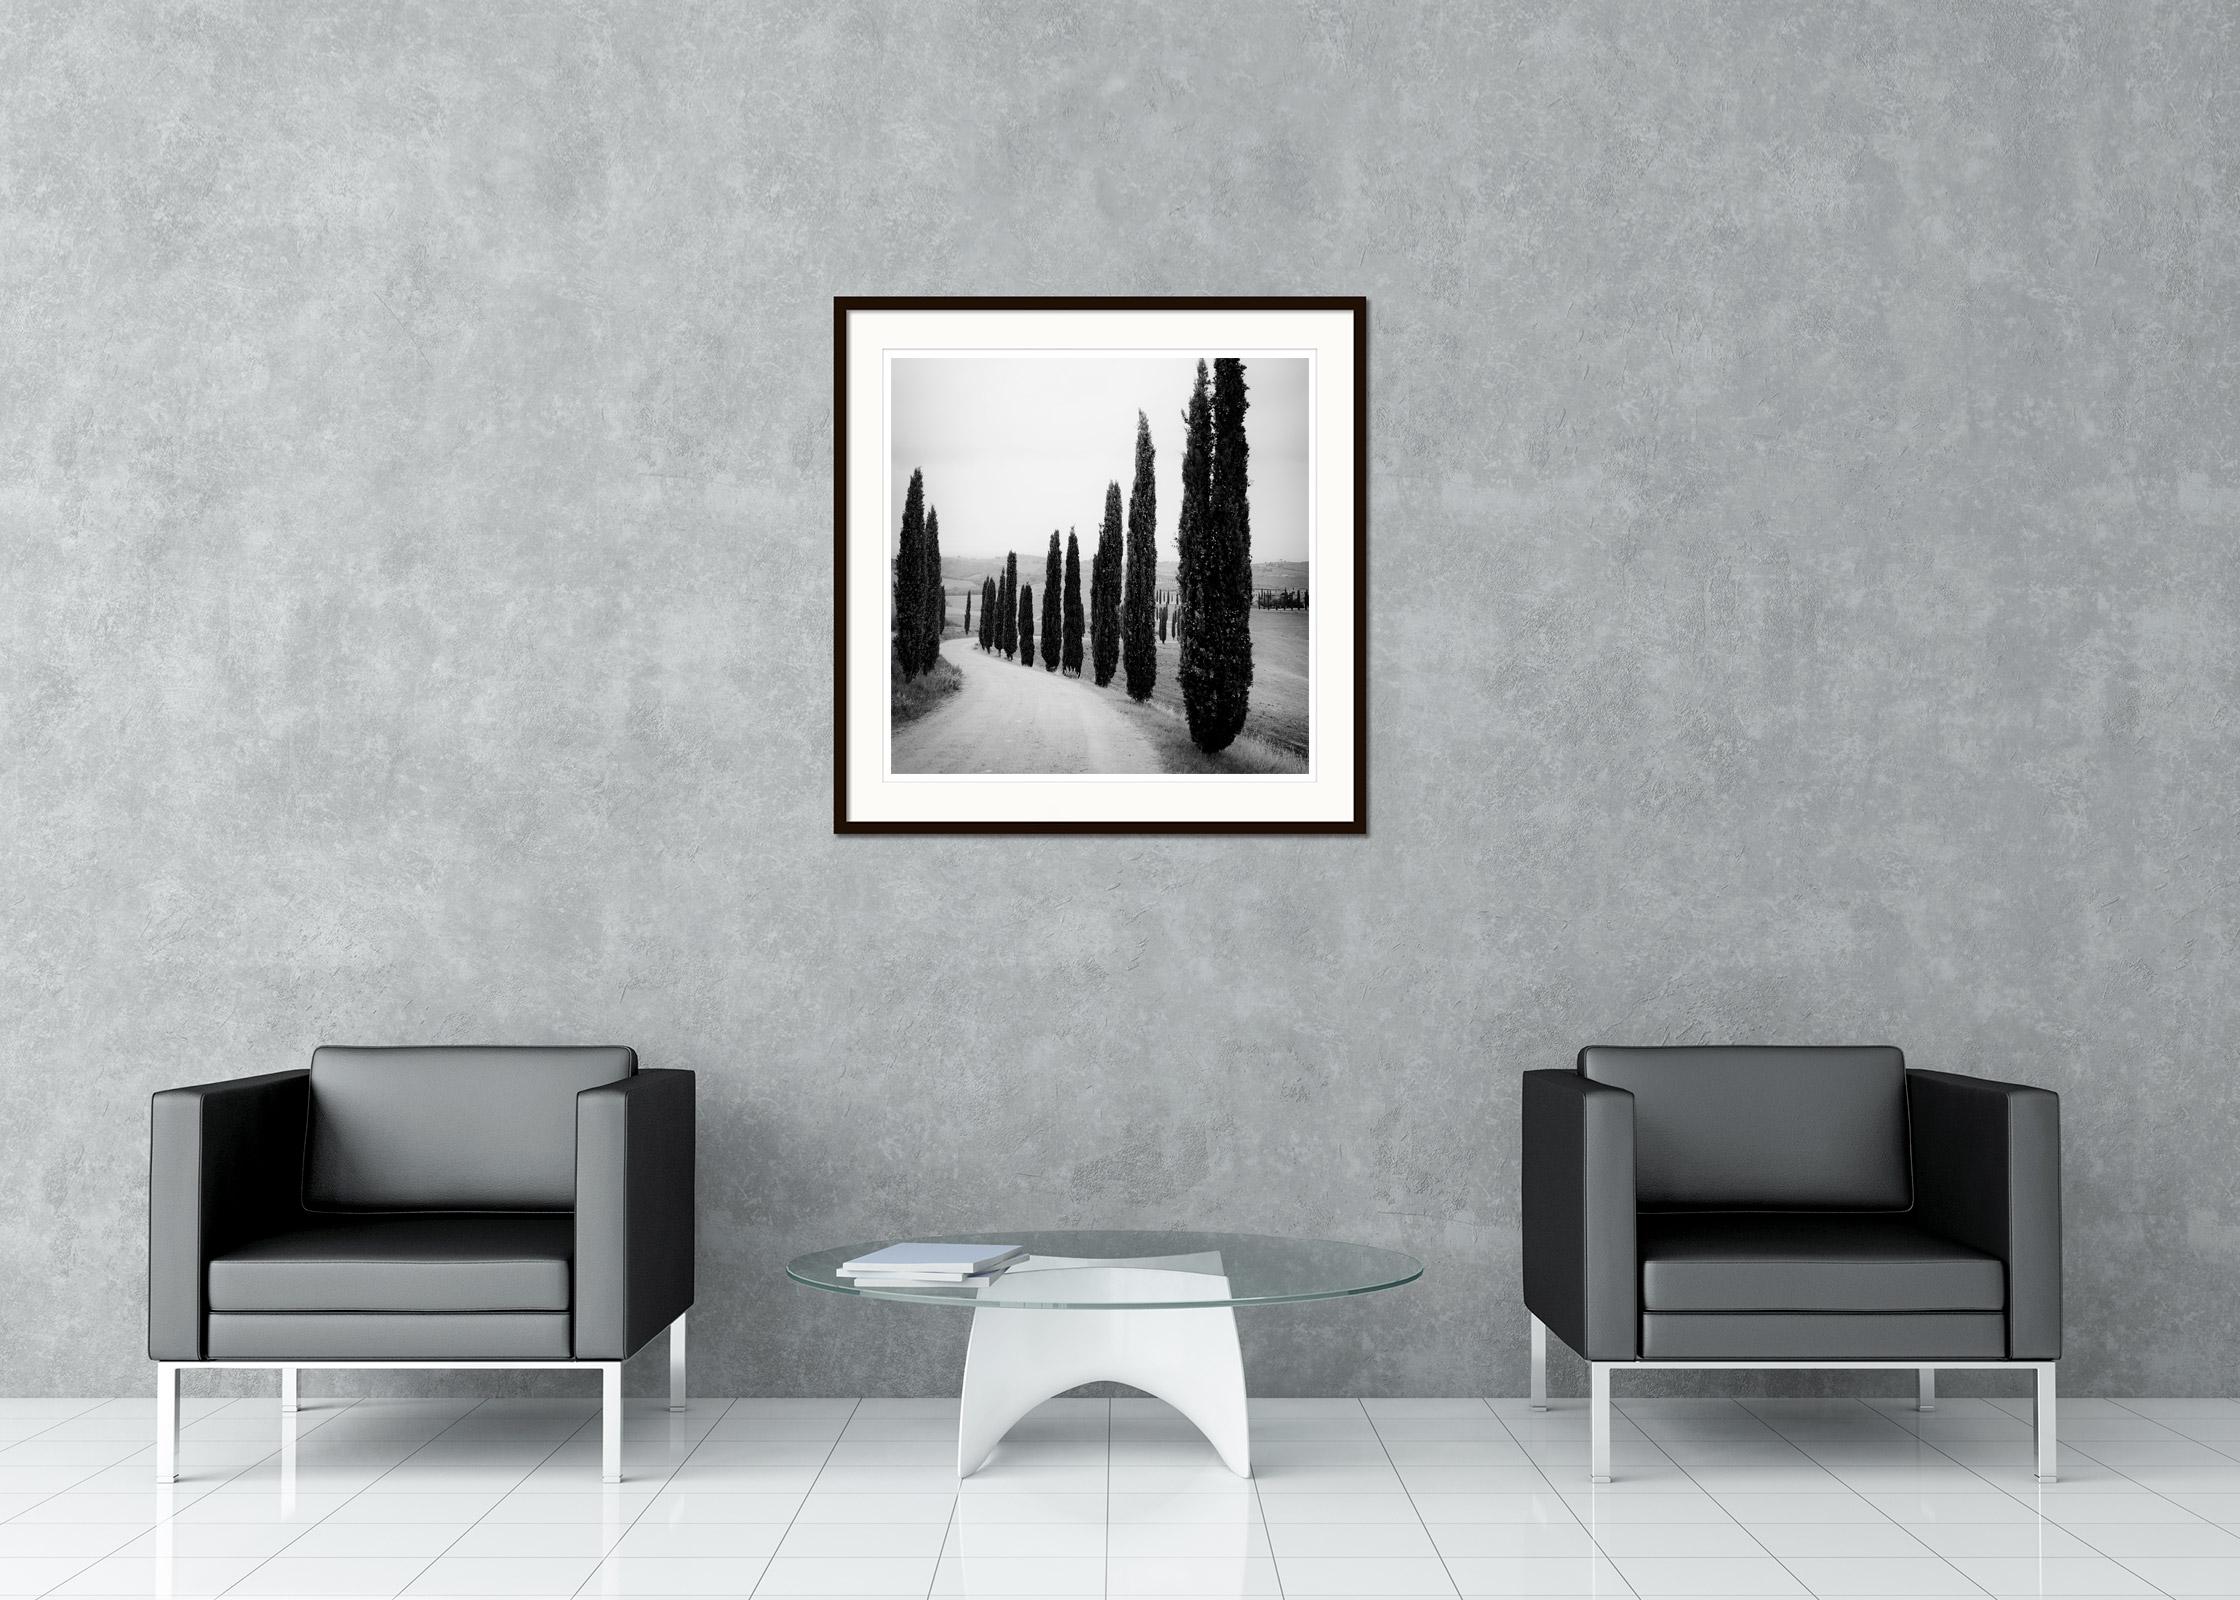 Black and white fine art landscape photography print. Path through a cypress avenue to the castle, Tuscany, Italy. Archival pigment ink print, edition of 9. Signed, titled, dated and numbered by artist. Certificate of authenticity included. Printed